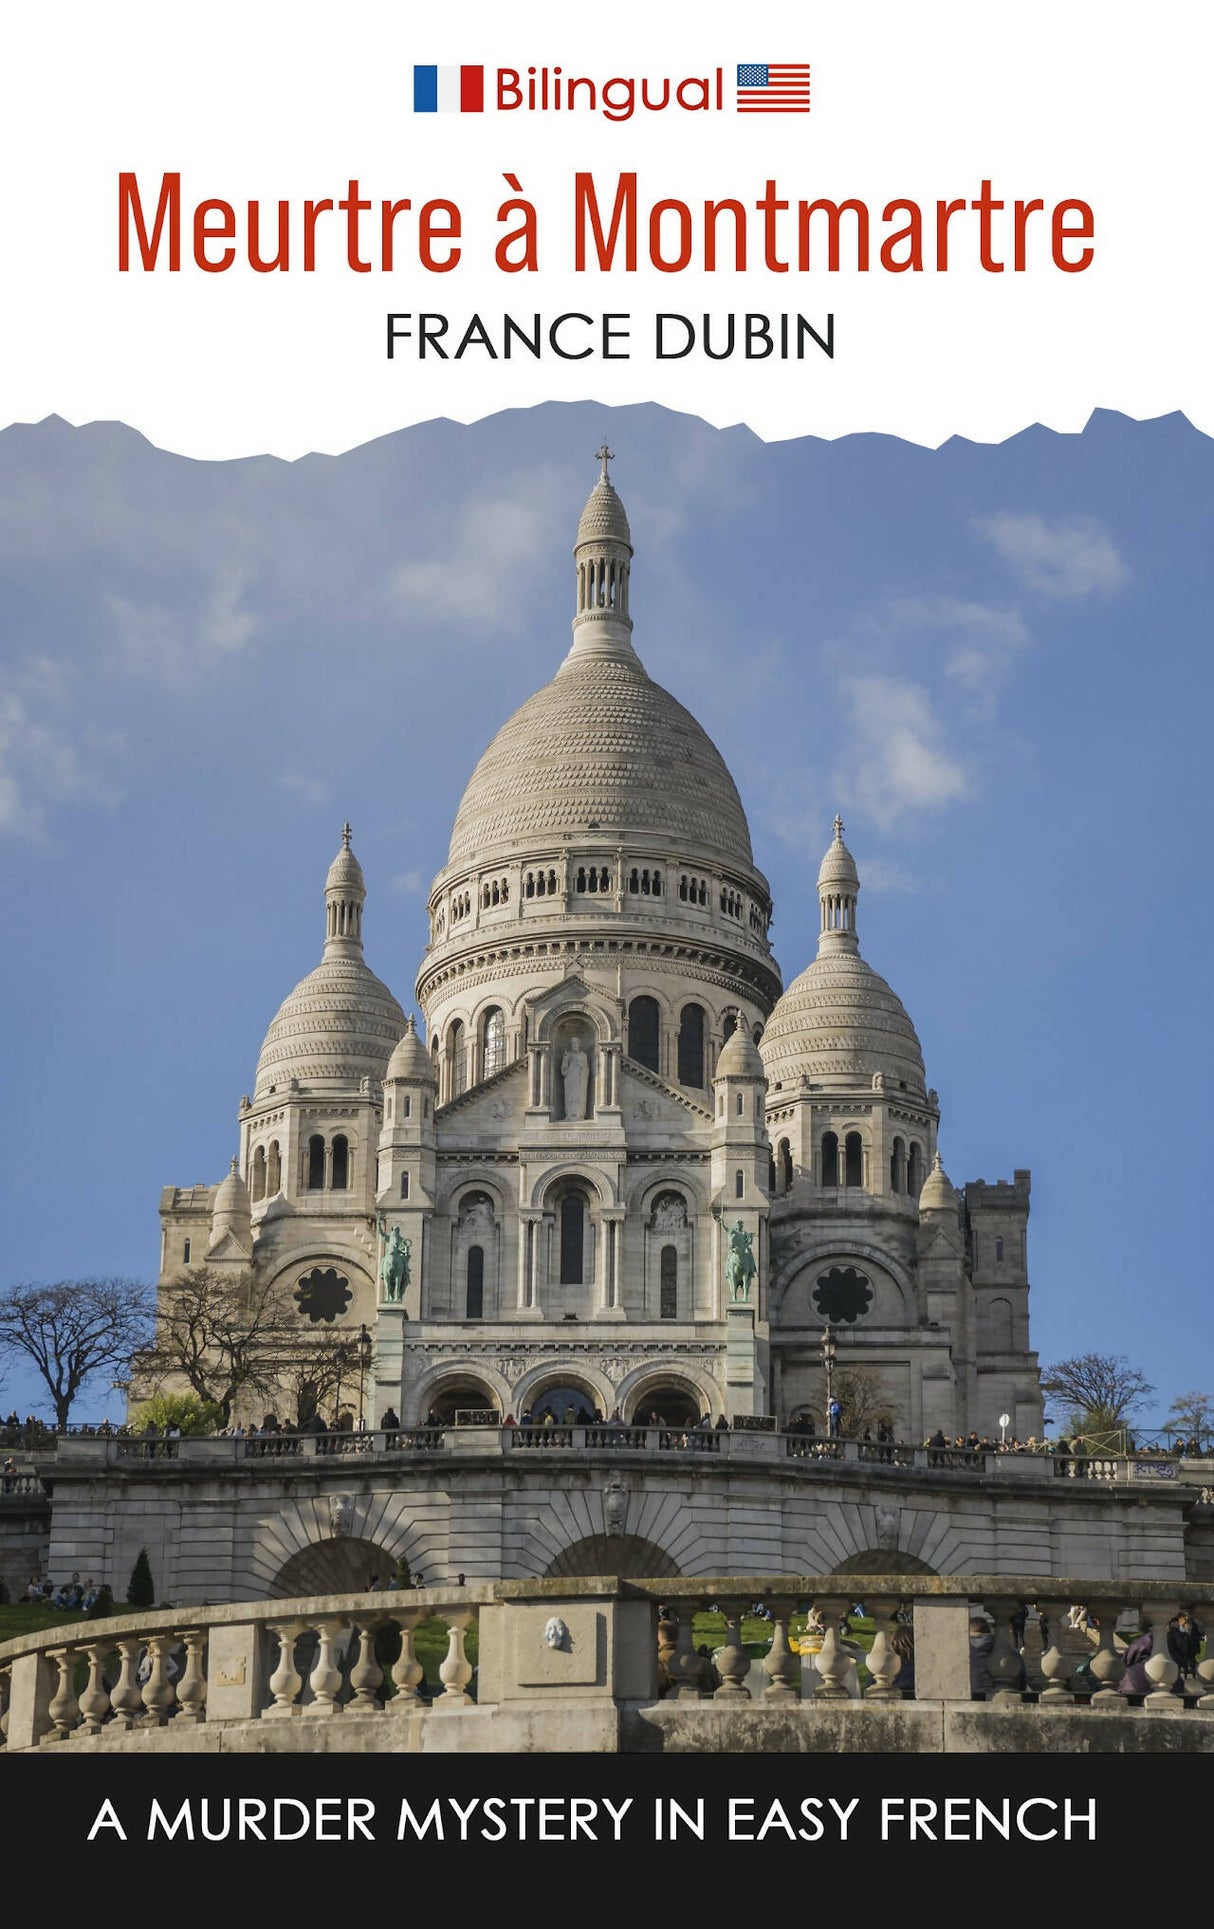 Meurtre à Montmartre (easy French Murder Mystery)